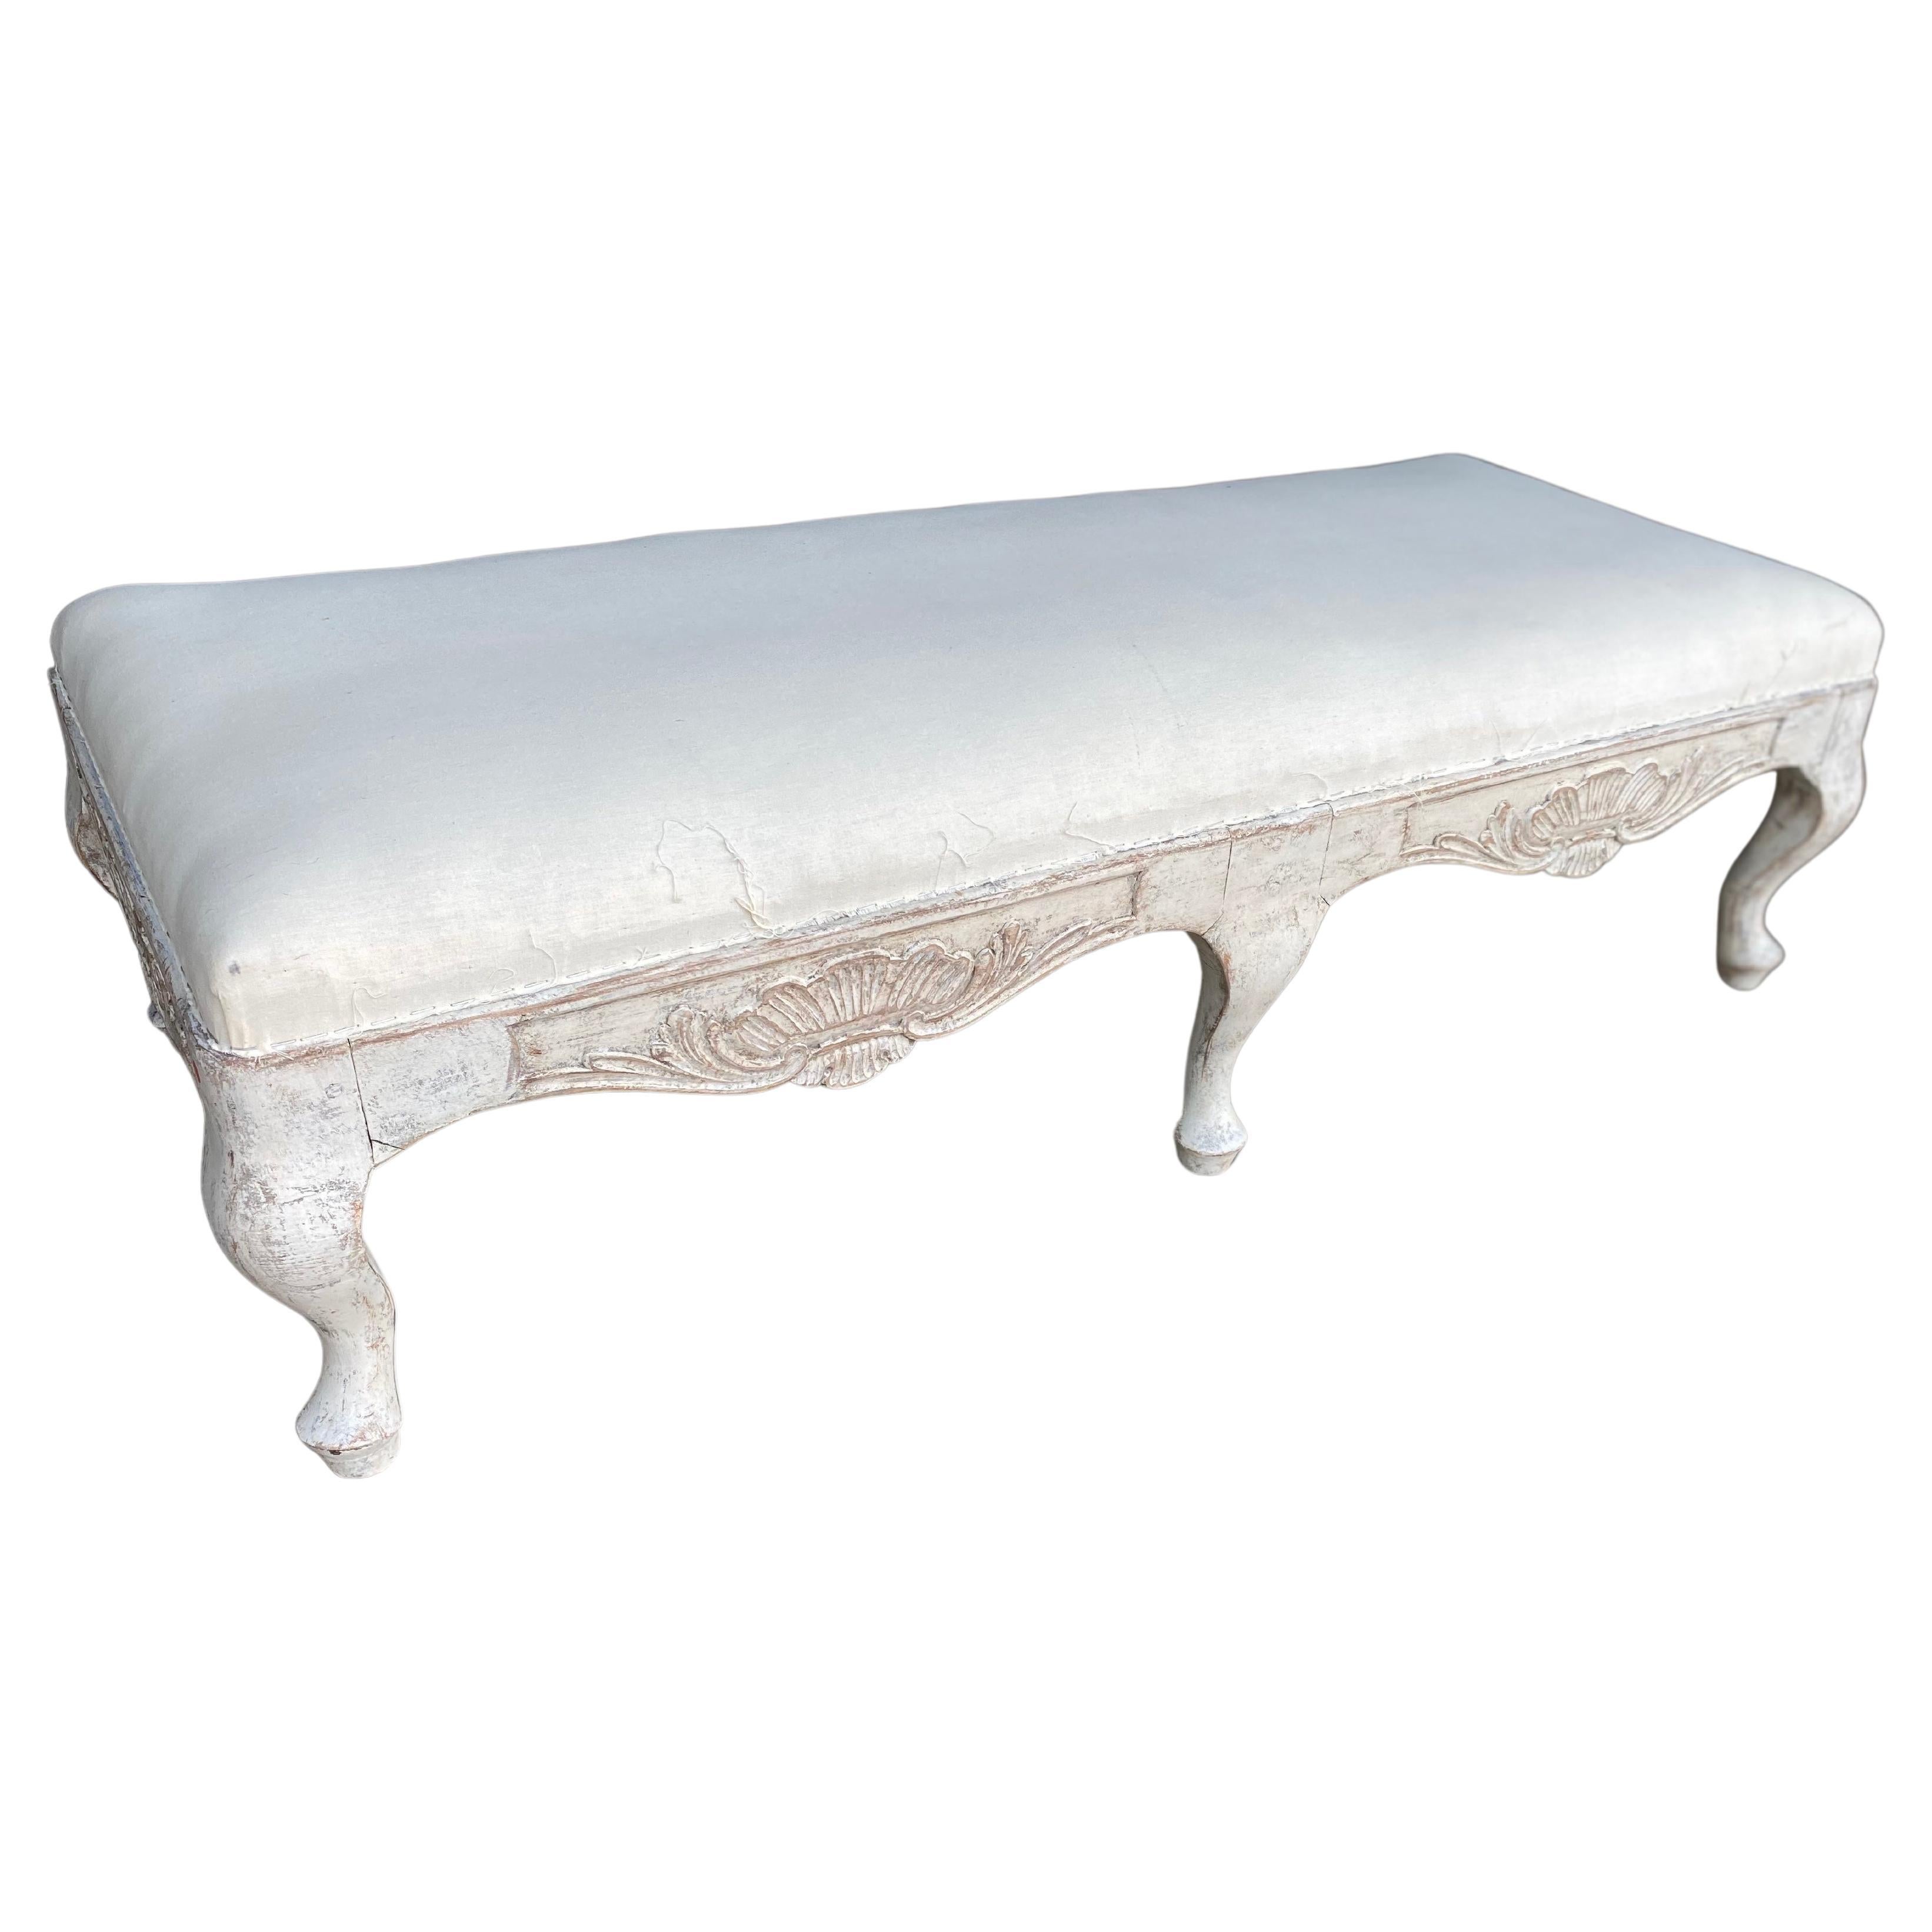 Early 19th Century Swedish Rococo Painted Bench For Sale